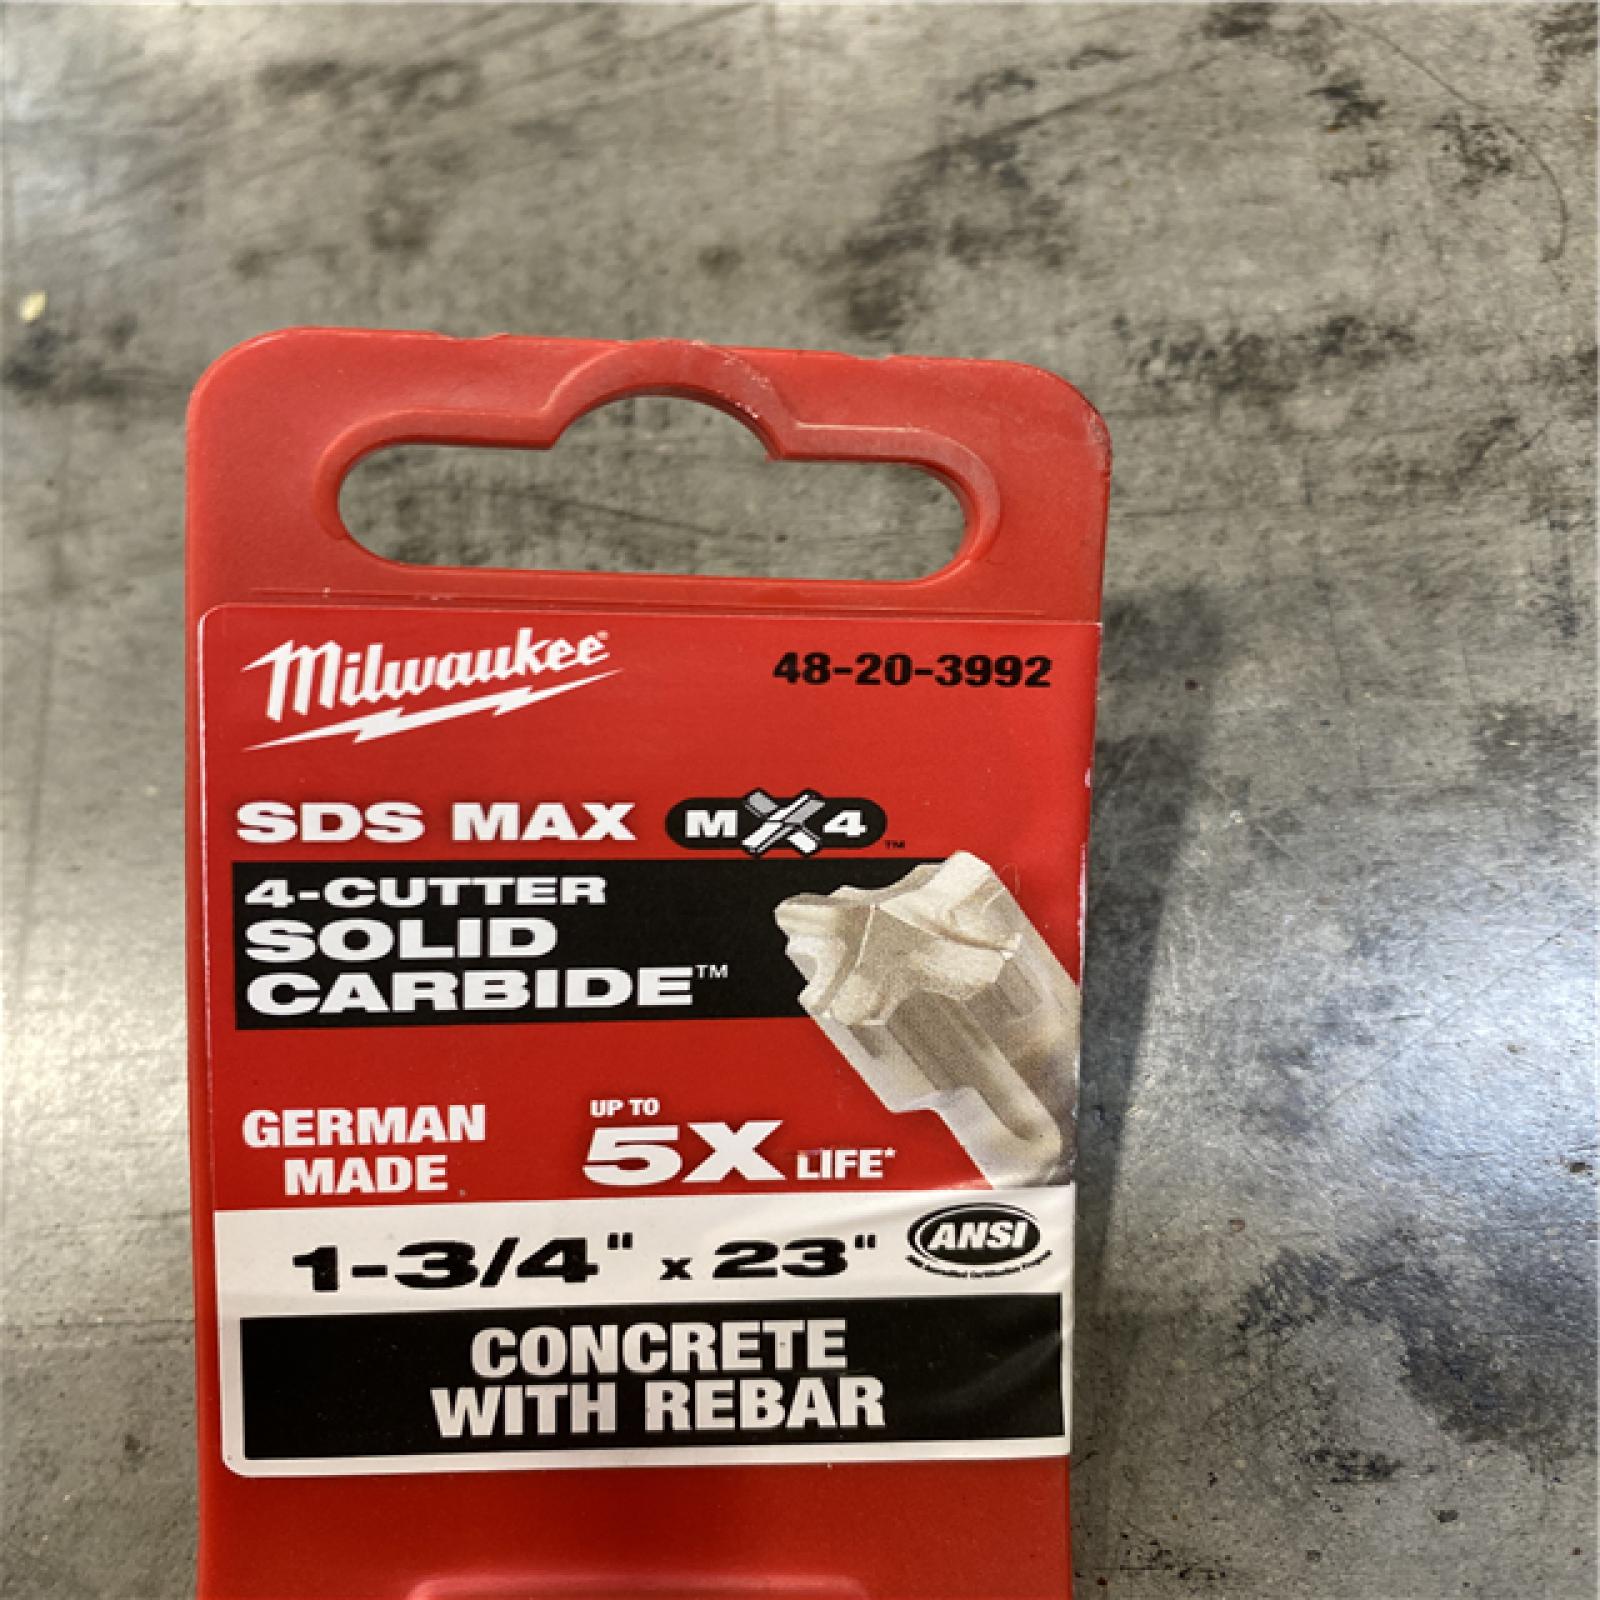 NEW! Milwaukee 1-3/4 in. x 23 in. 4-Cutter SDS-MAX Carbide Drill